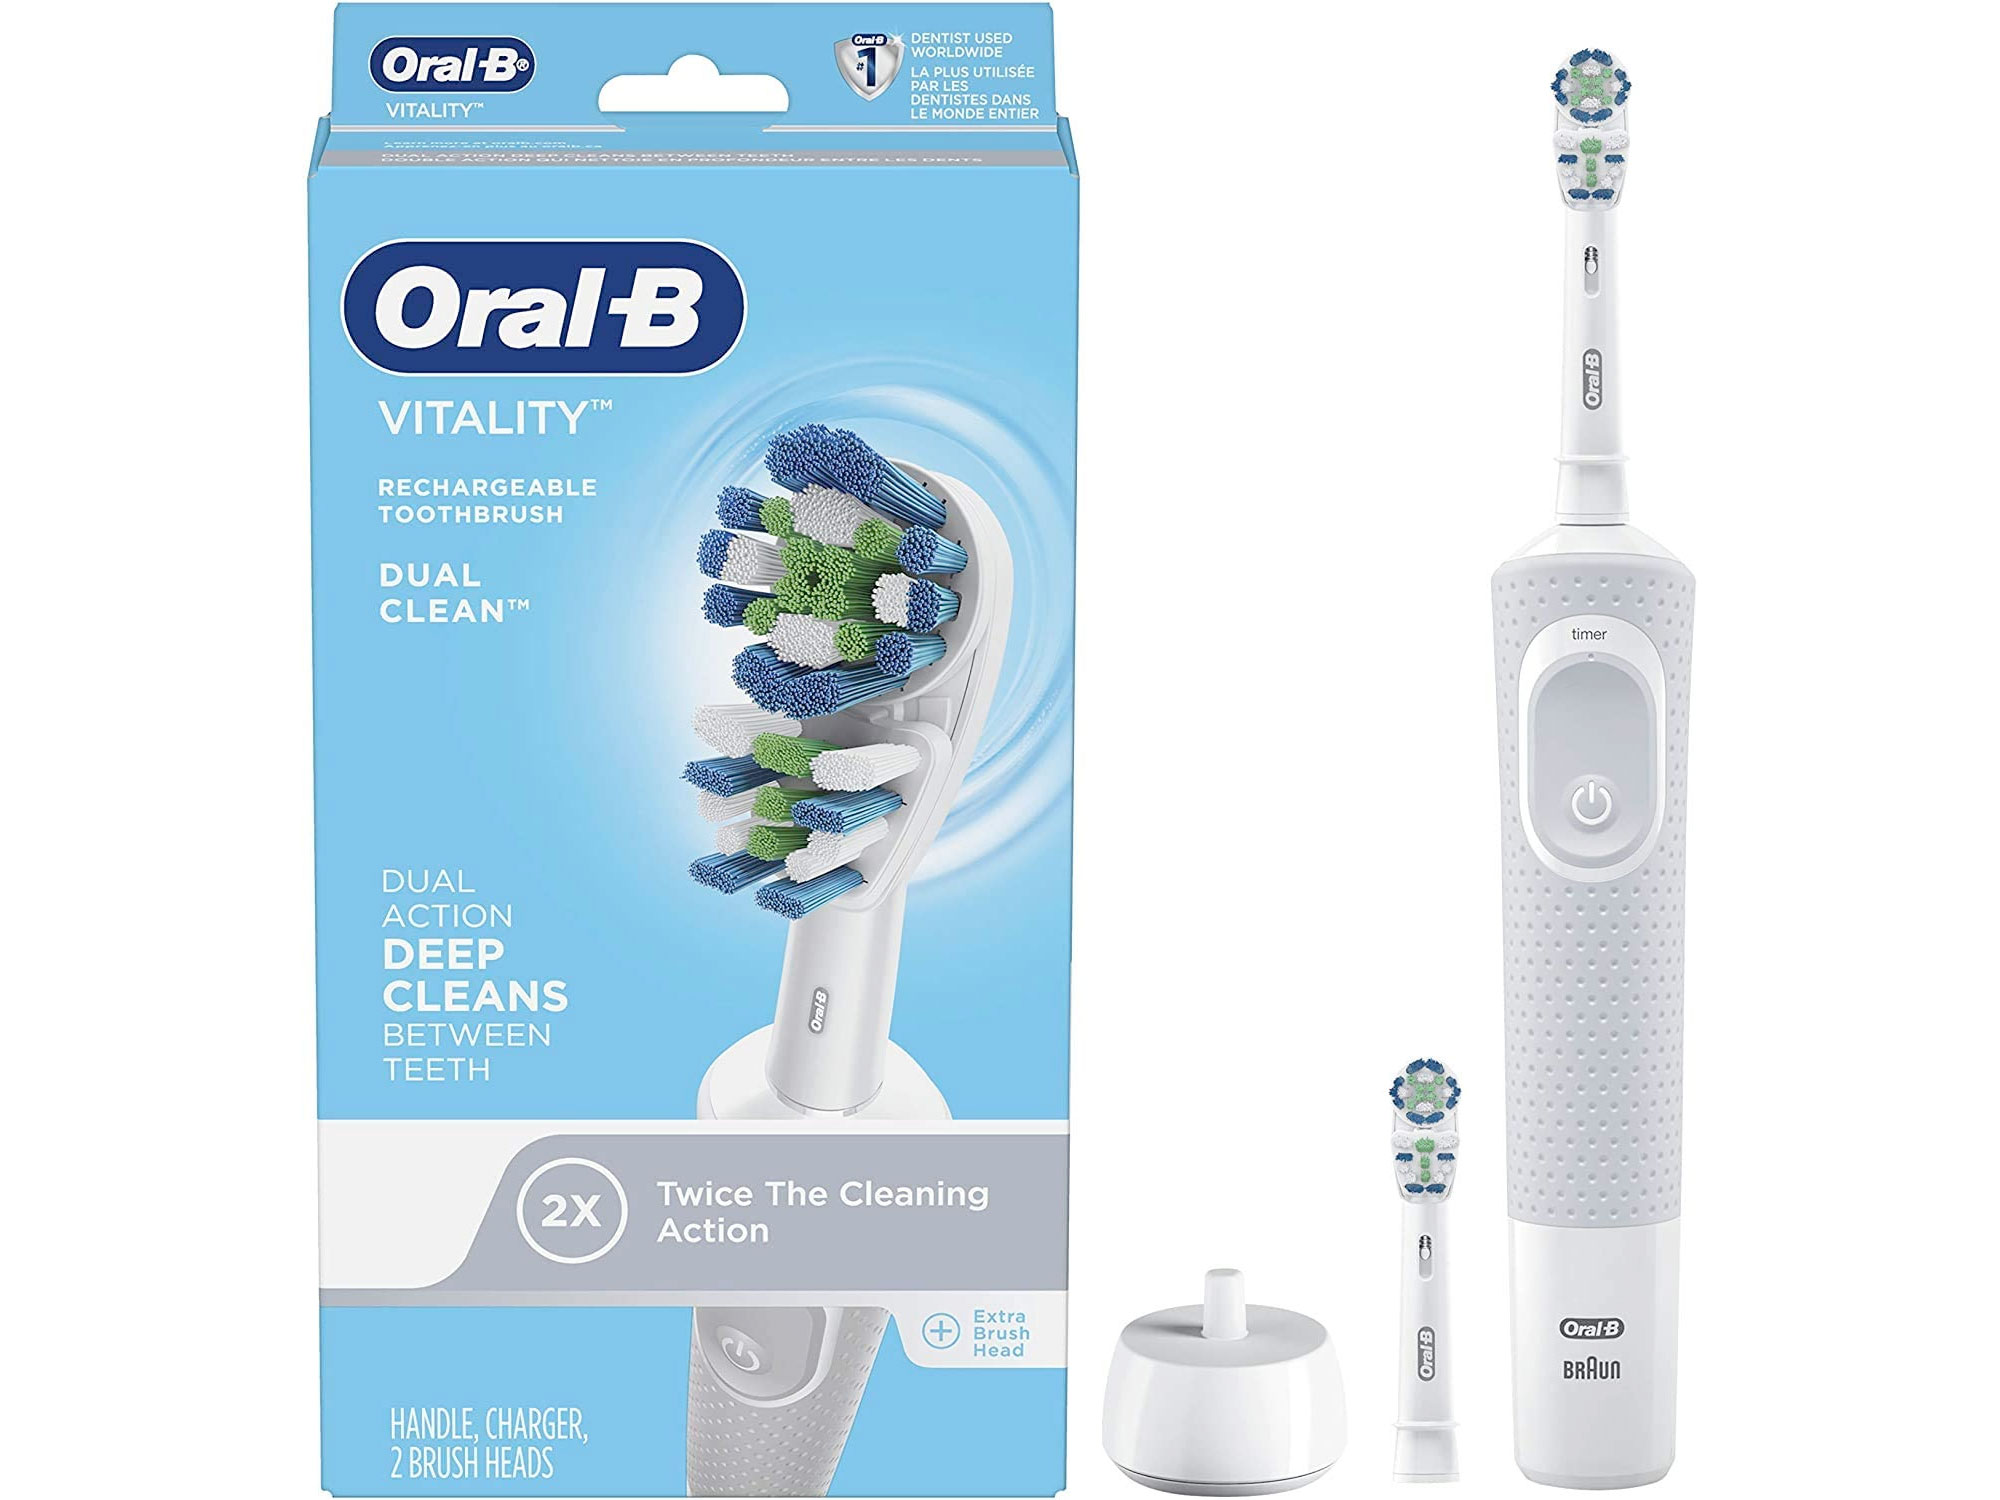 Amazon：Oral-B Vitality Dual Clean Electric Rechargeable Toothbrush with 2 Brush Heads只賣$24.97